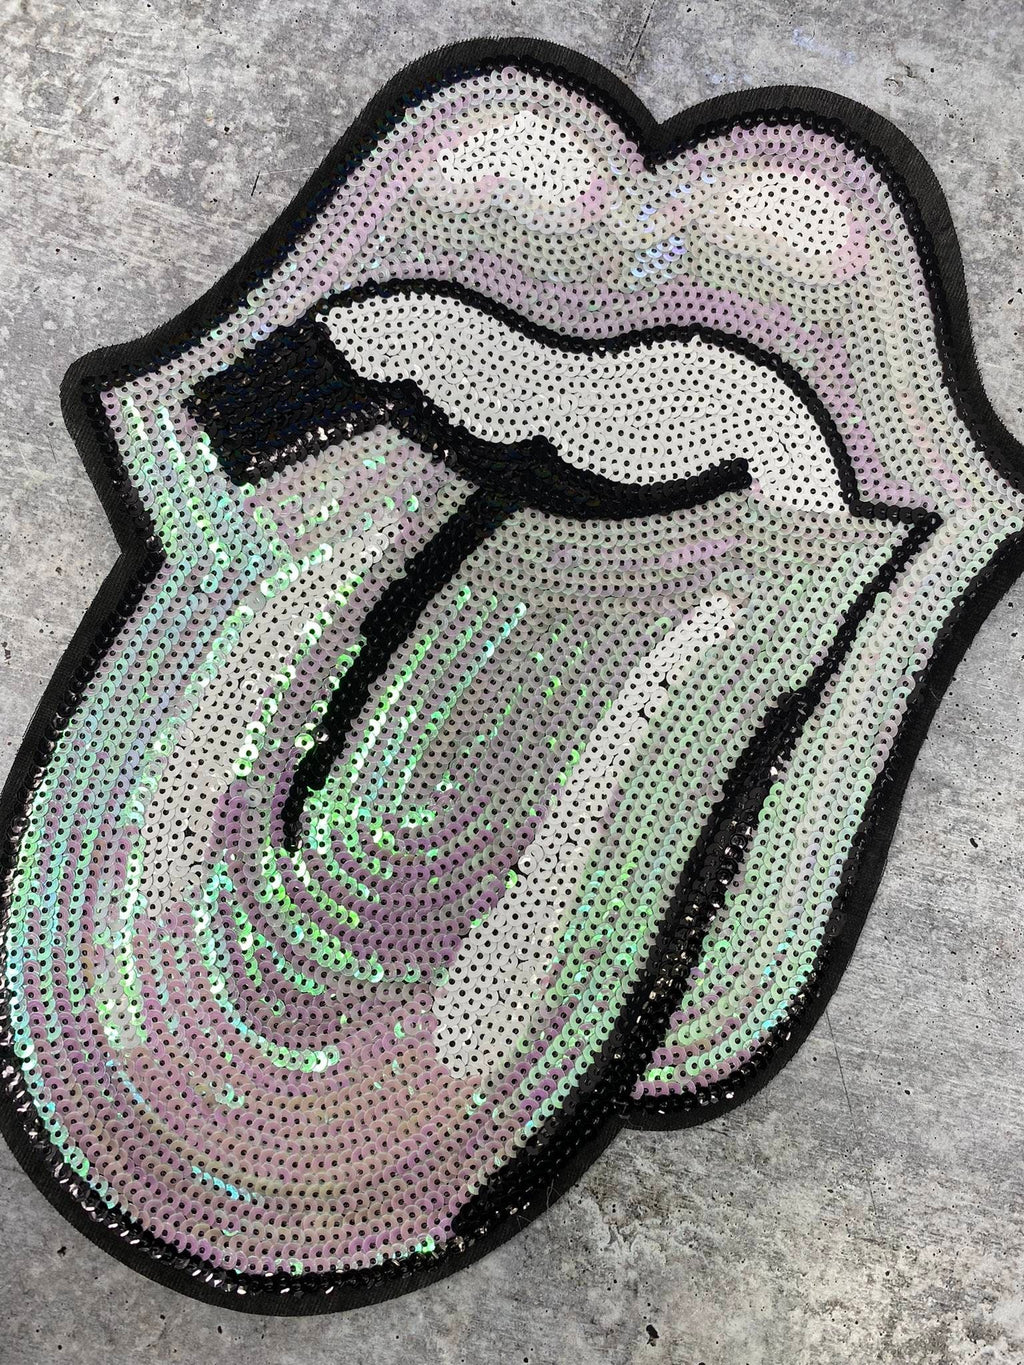 3 Brand Embroidered Patch — Kissing Candice